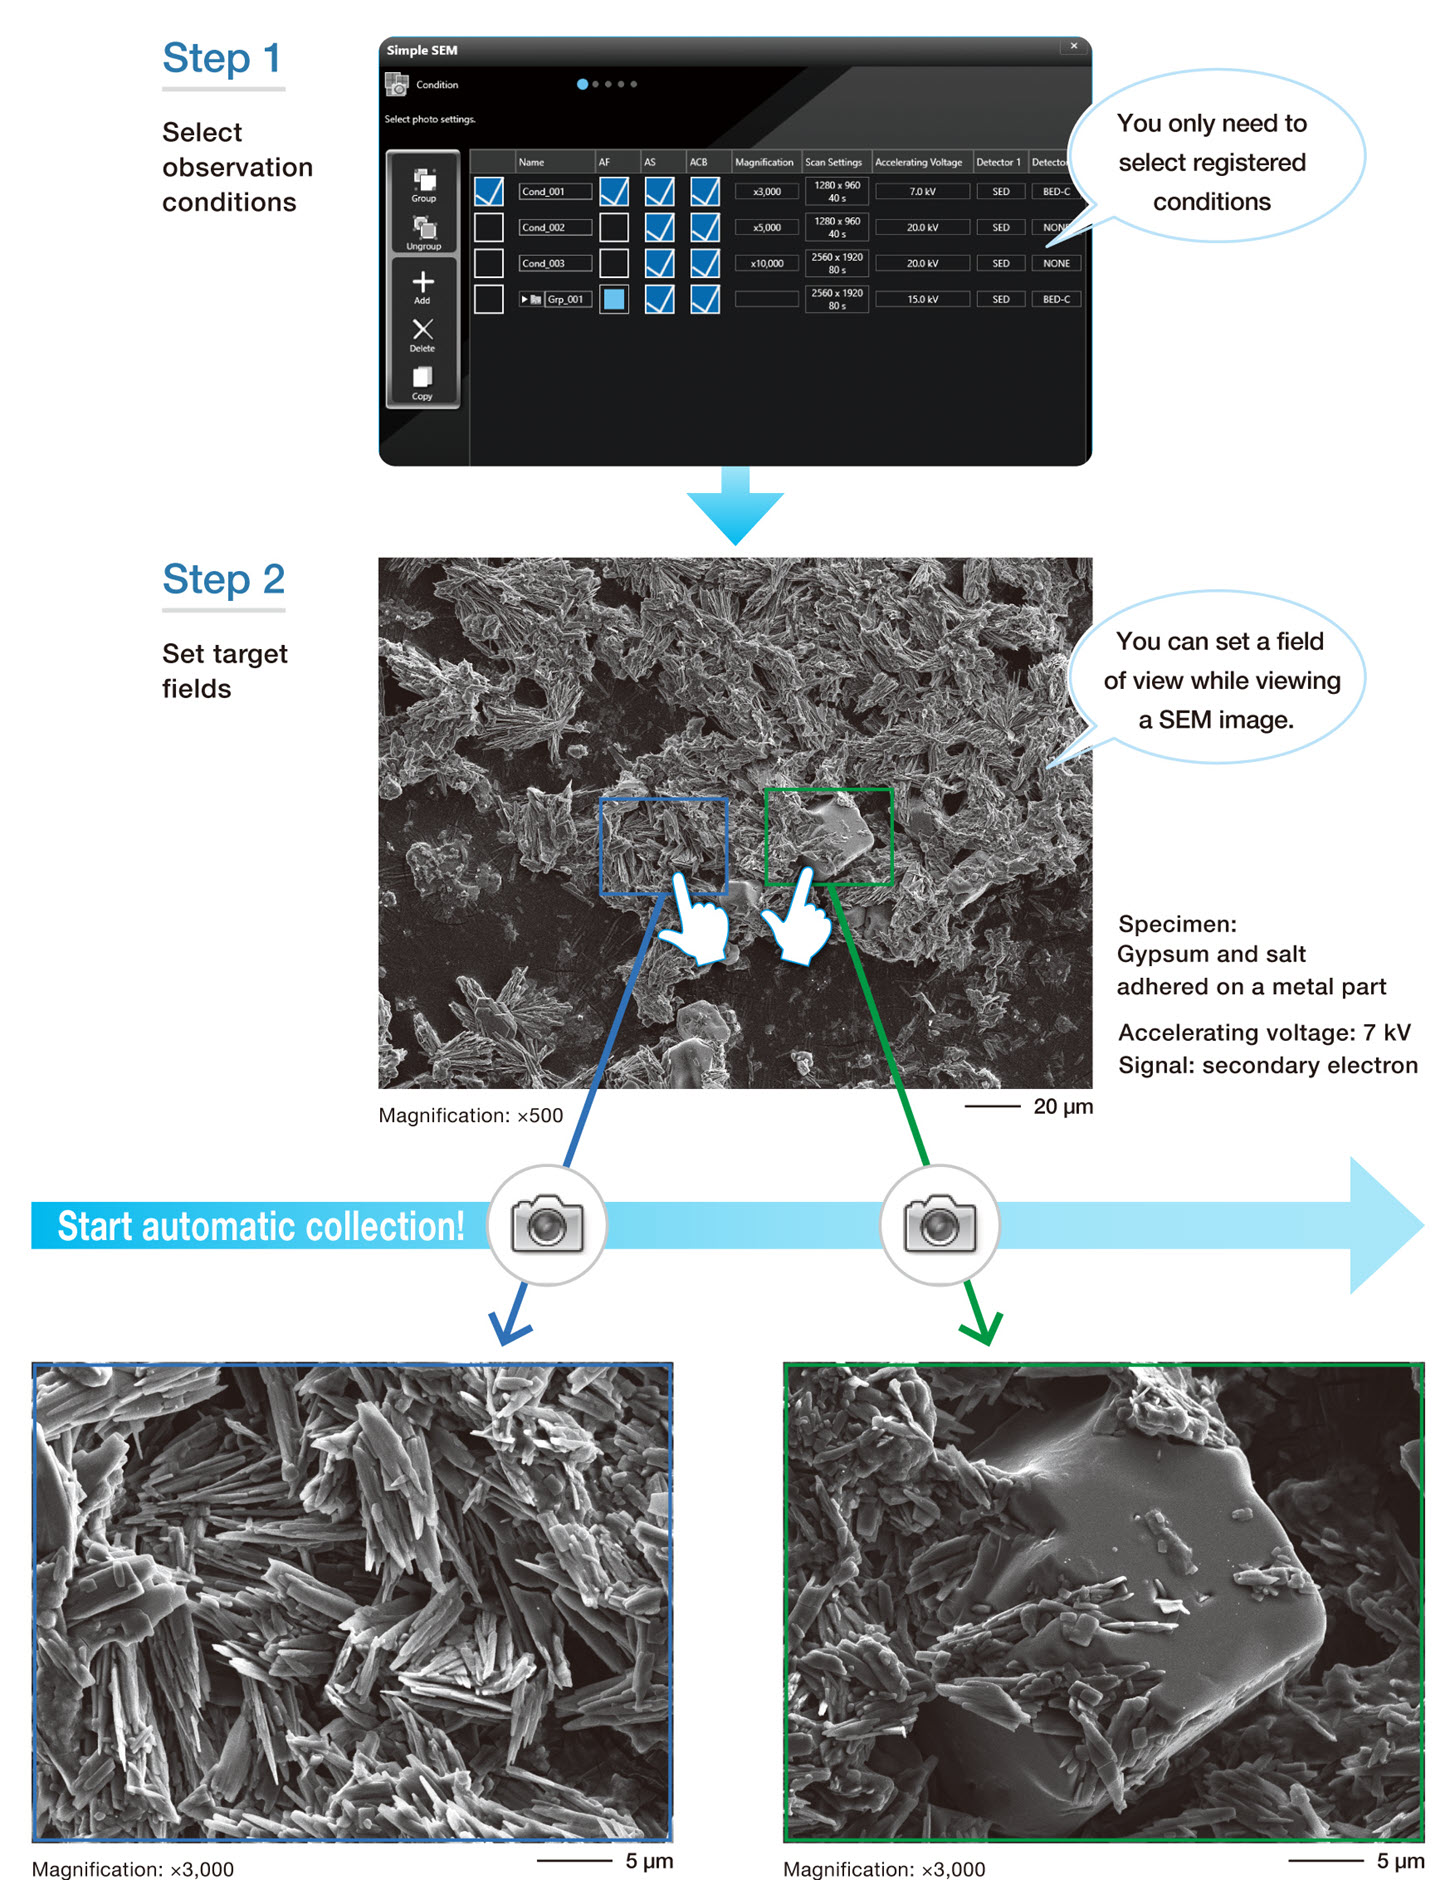 Simple SEM automates image collection at multiple locations, conditions and magnifications